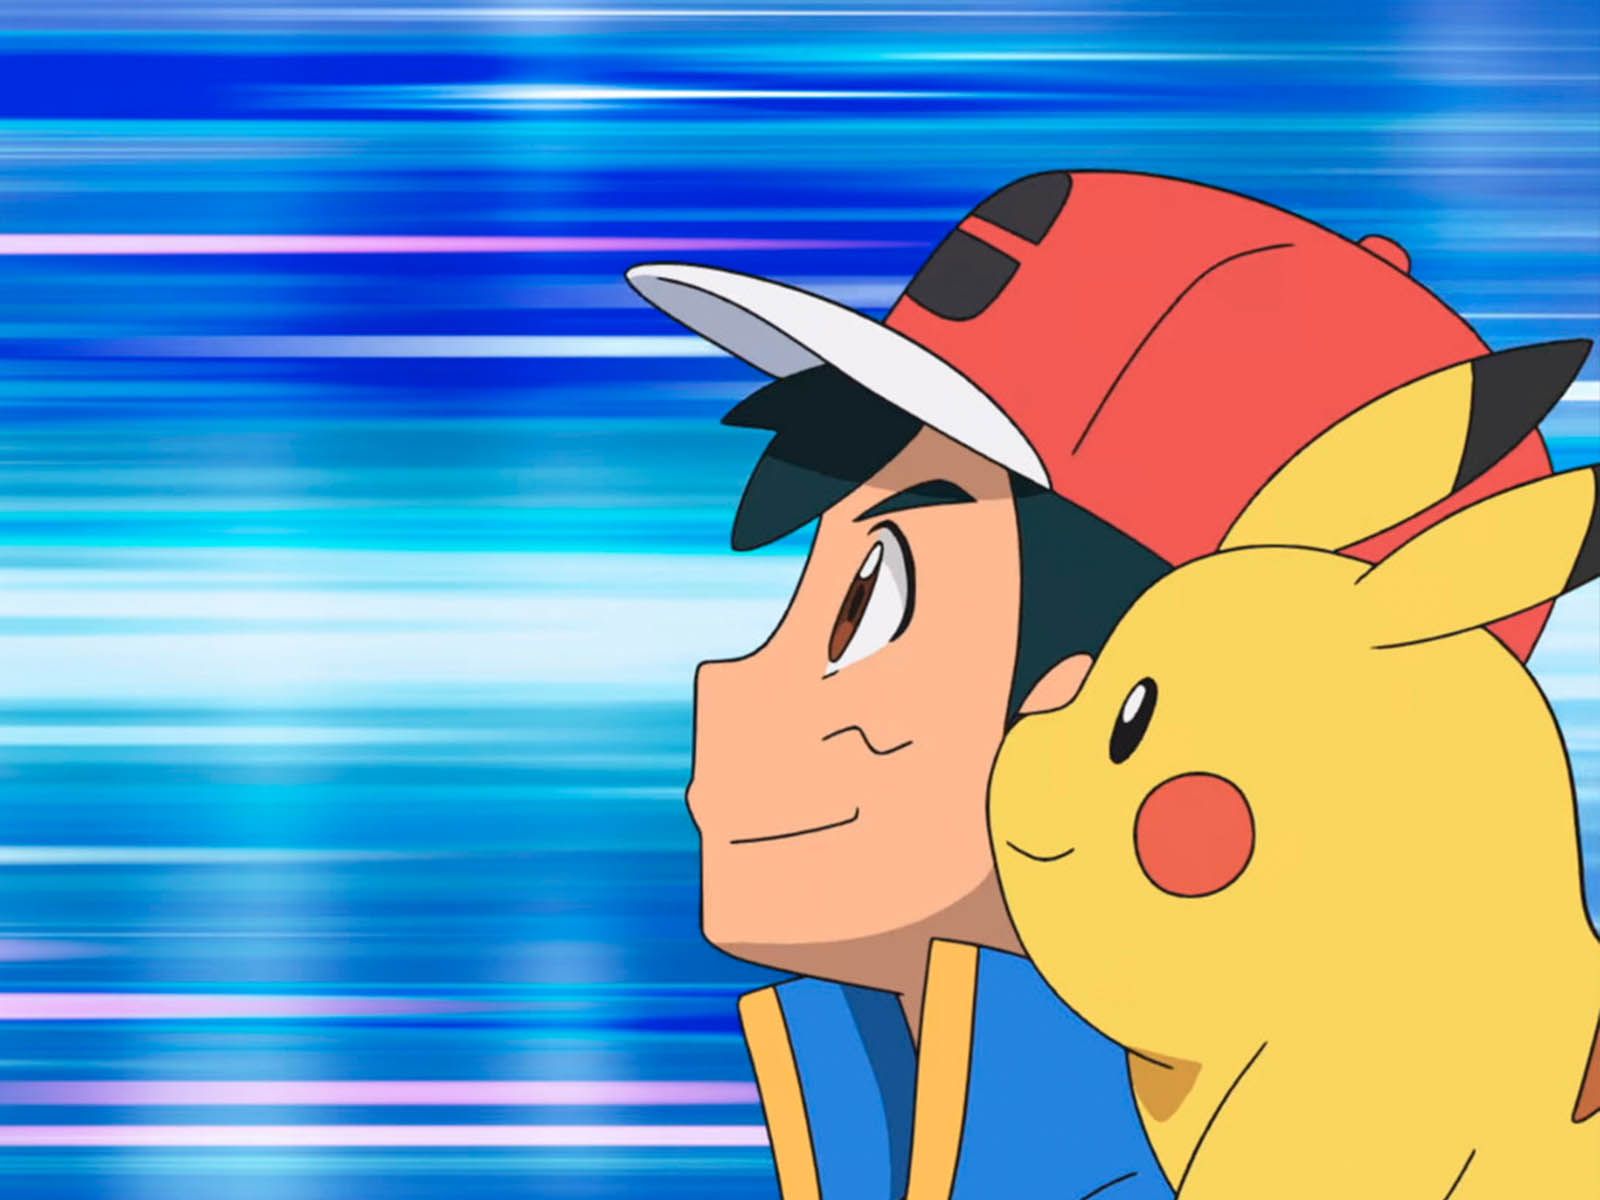 New 'Pokémon' Series Coming in 2023, Without Ash Ketchum, Anime, Pokemon,  Television